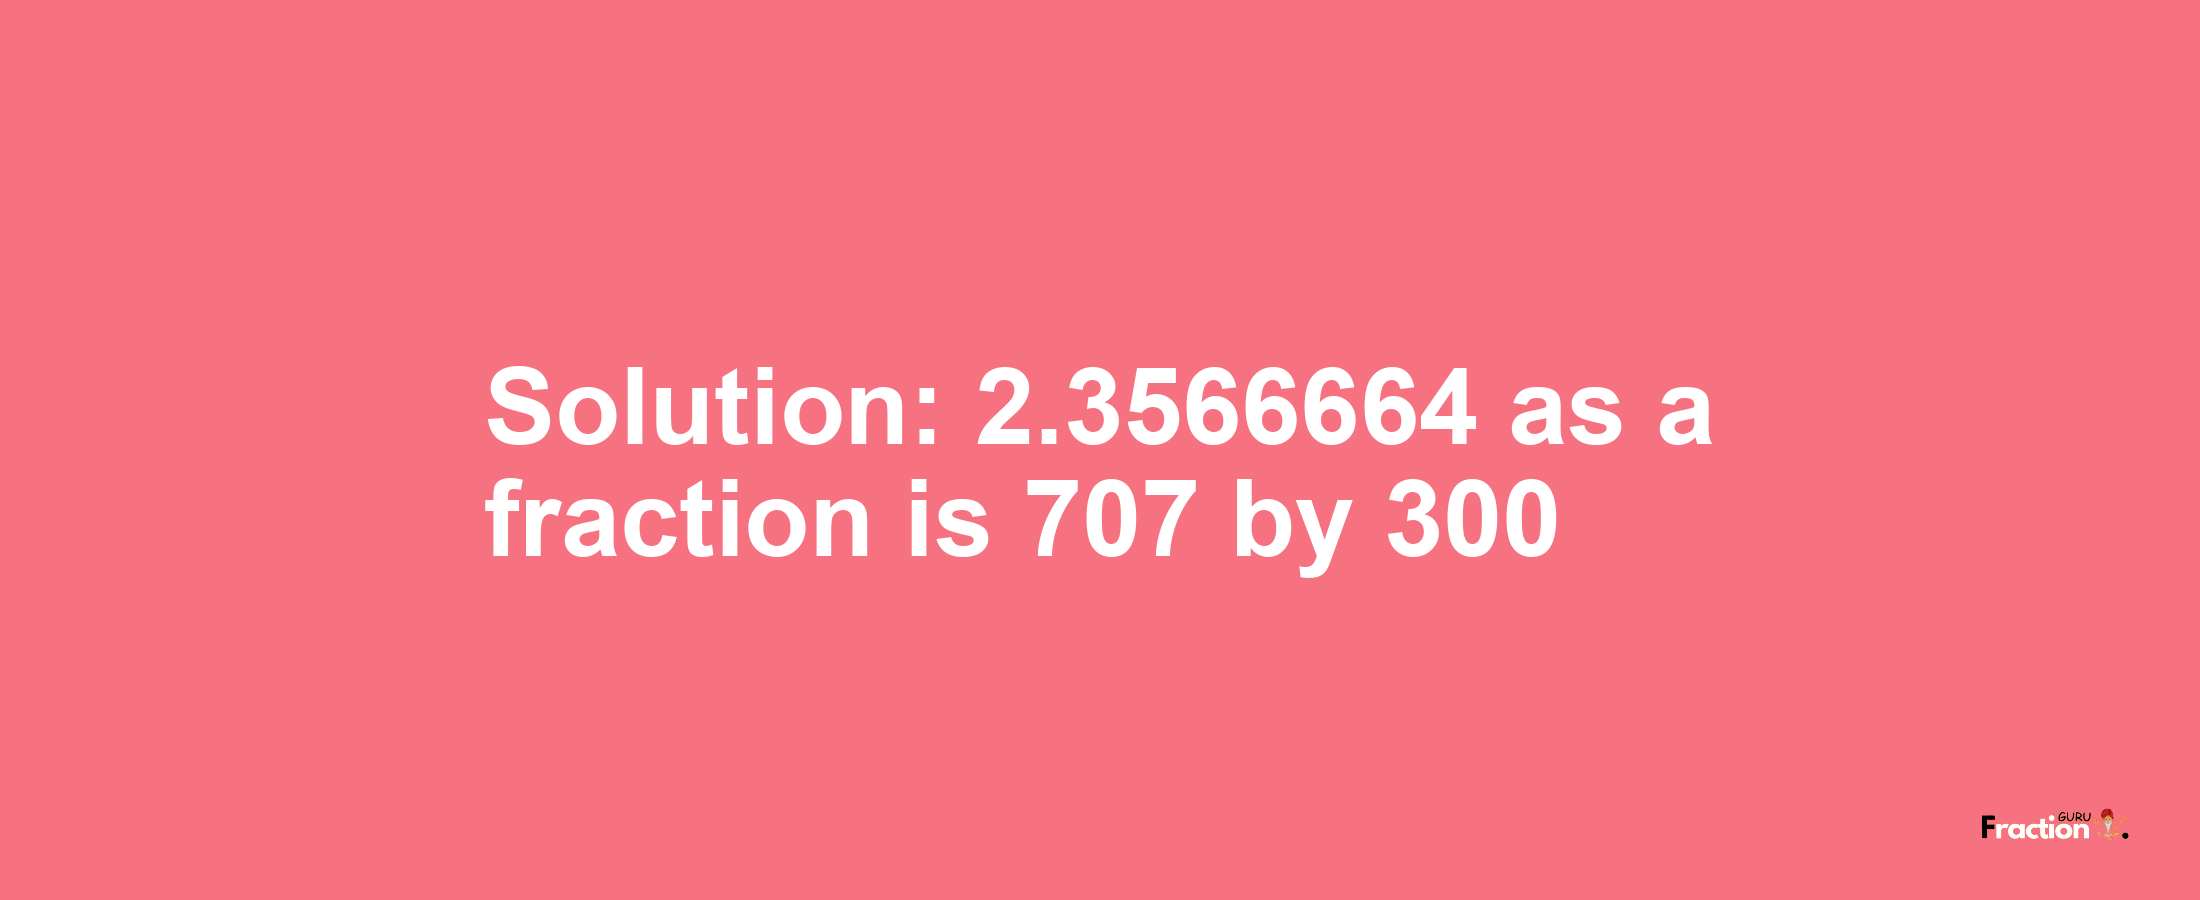 Solution:2.3566664 as a fraction is 707/300